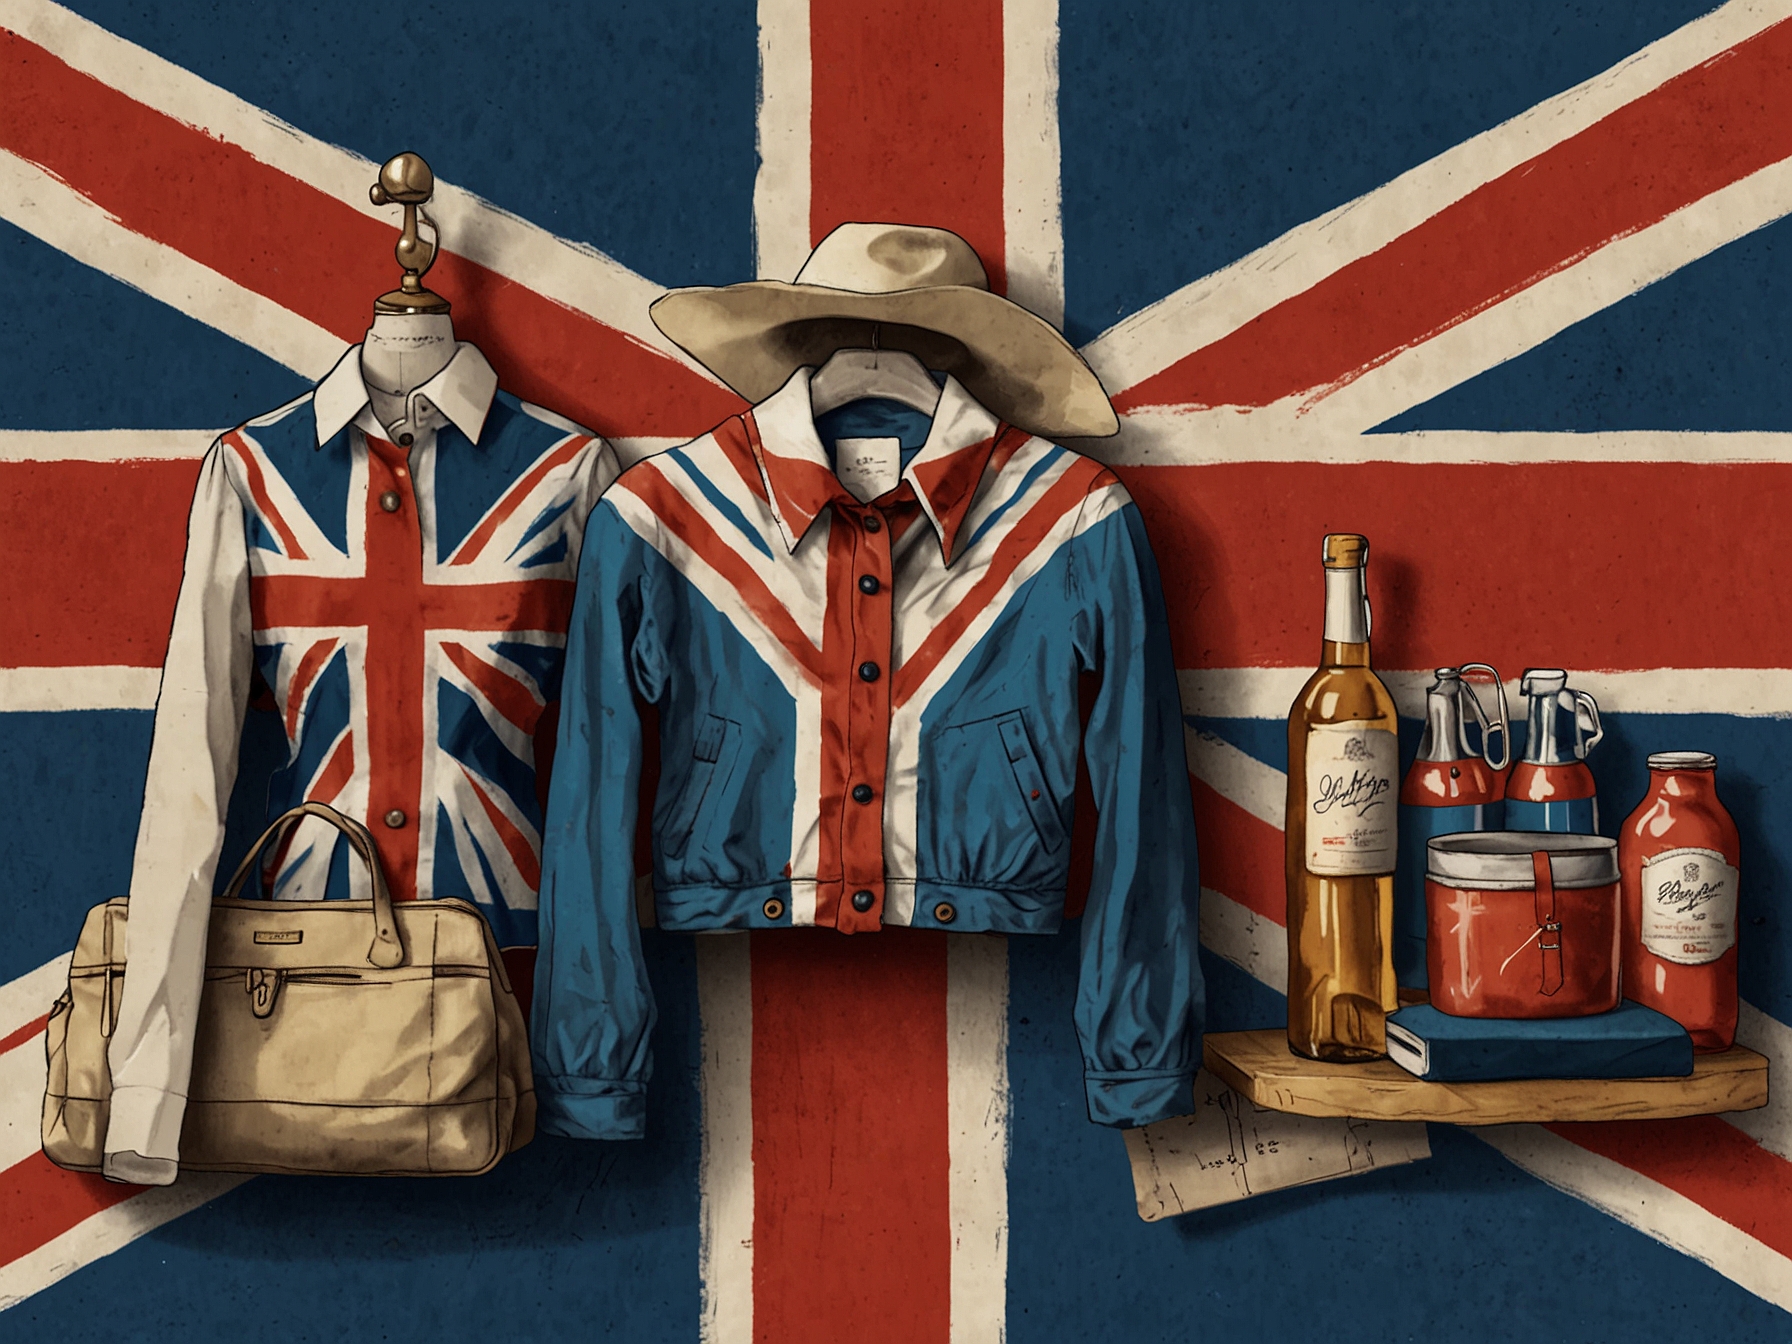 A display of Union Jack-themed merchandise, including clothing, accessories, and home decor items. This image highlights the flag's enduring appeal and its integration into contemporary fashion and lifestyle.